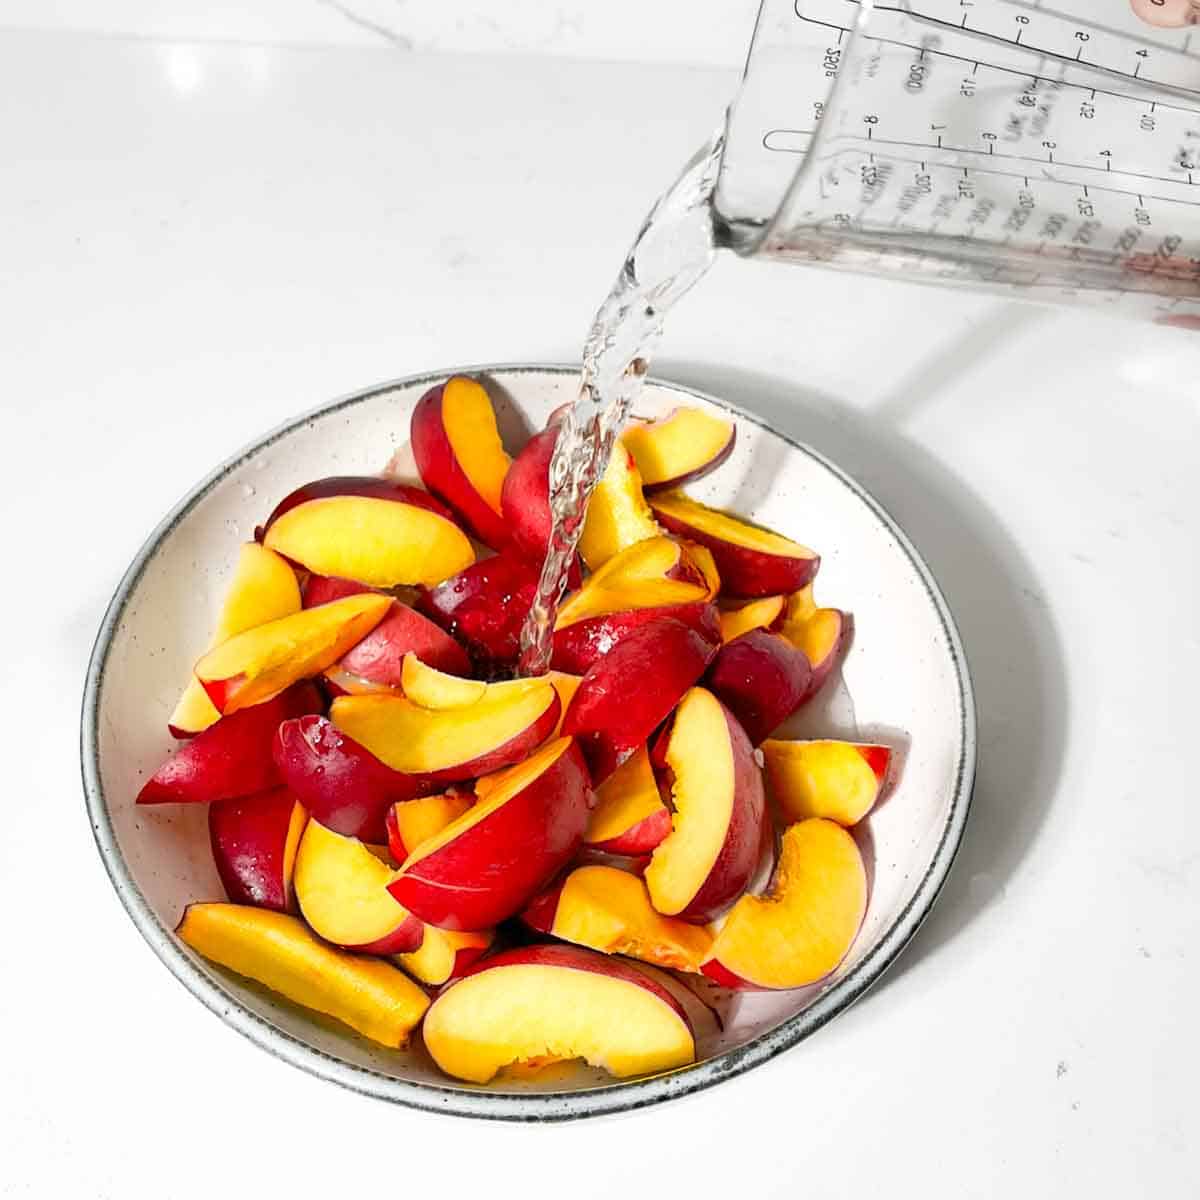 Adding water to the nectarines and lemon juice.